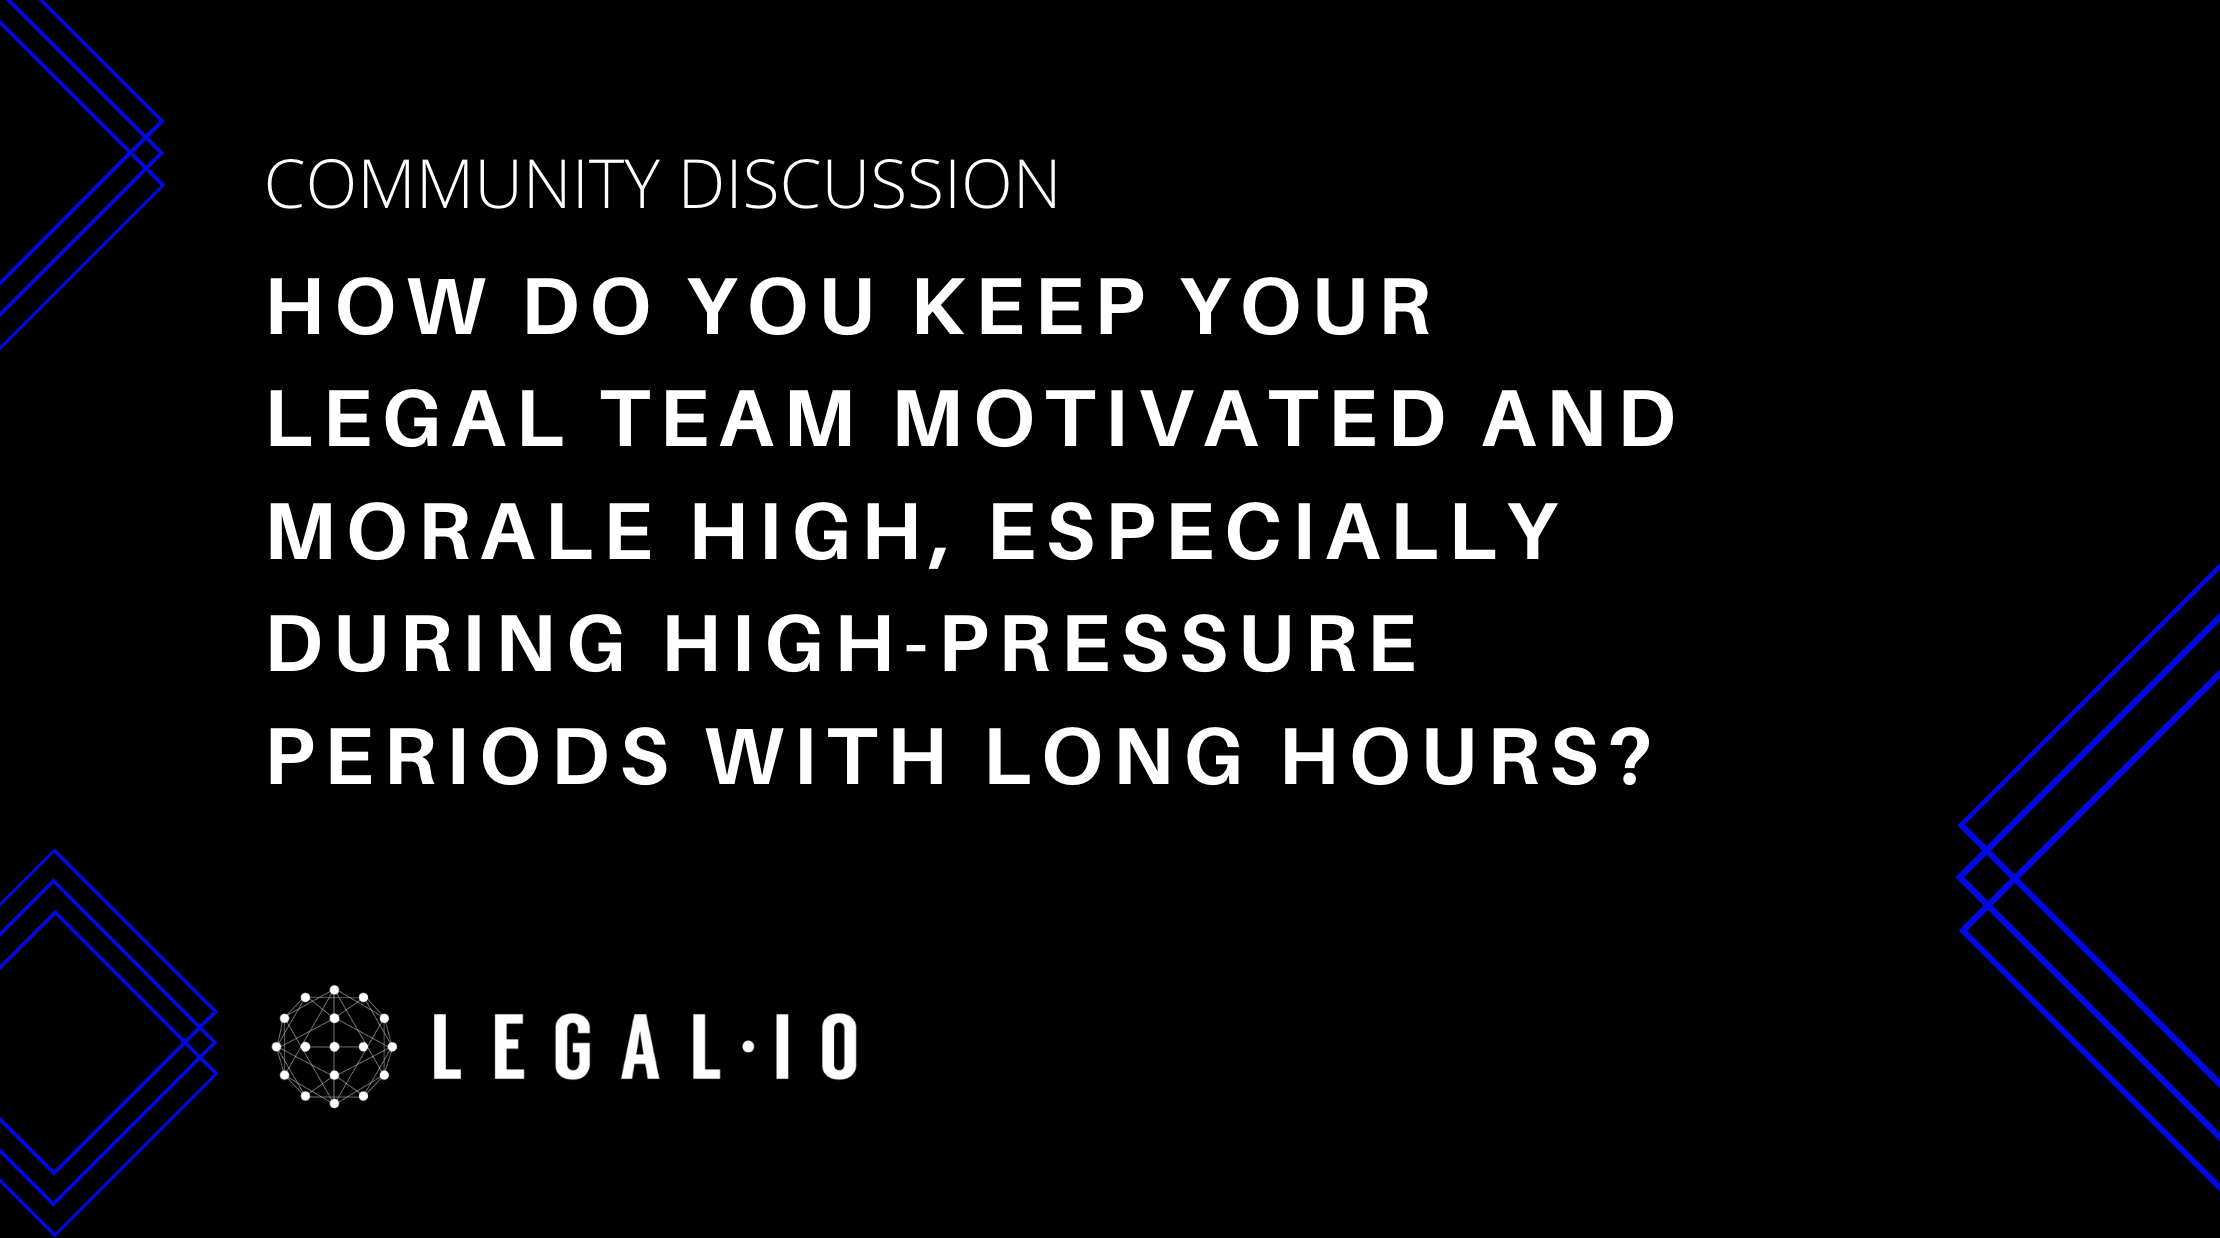 Community Discussion: How do you keep your legal team motivated and morale high, especially during high-pressure periods with long hours?